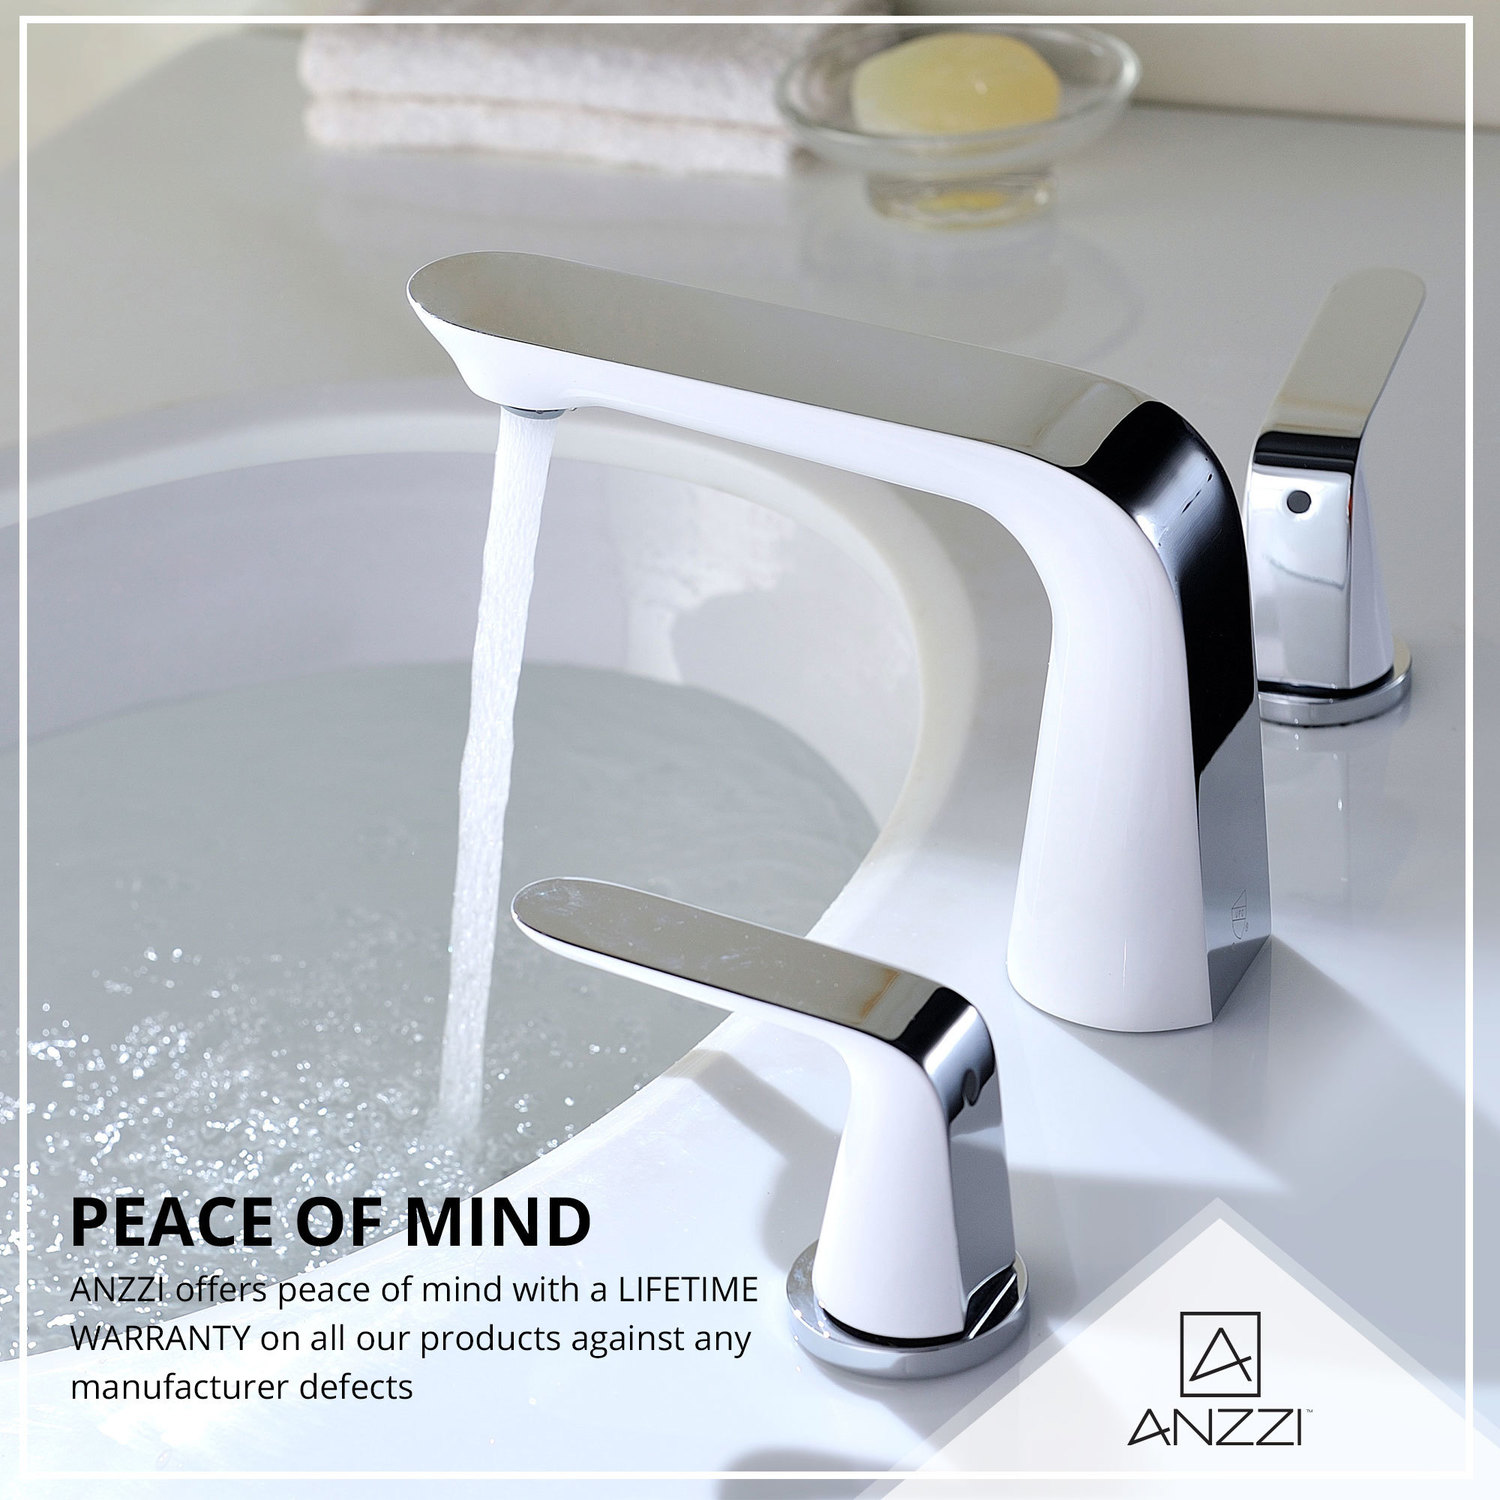 modern free standing vanity Anzzi BATHROOM - Faucets - Bathroom Sink Faucets - Wide Spread Chrome